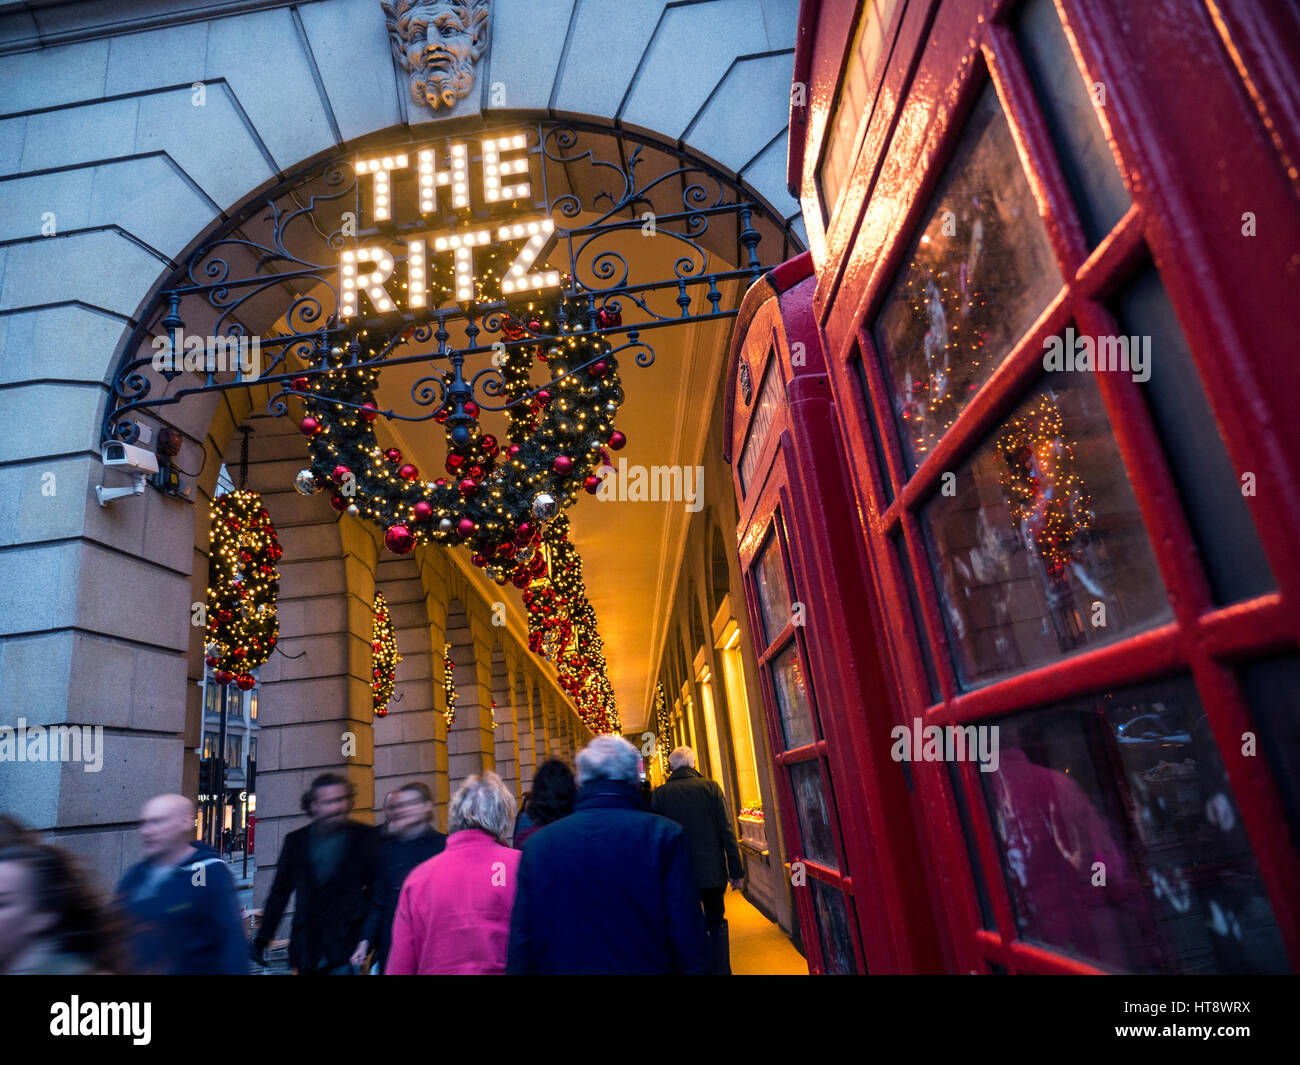 The Ritz Hotel at dusk Christmas decorations red telephone box Piccadilly London UK Stock Photo